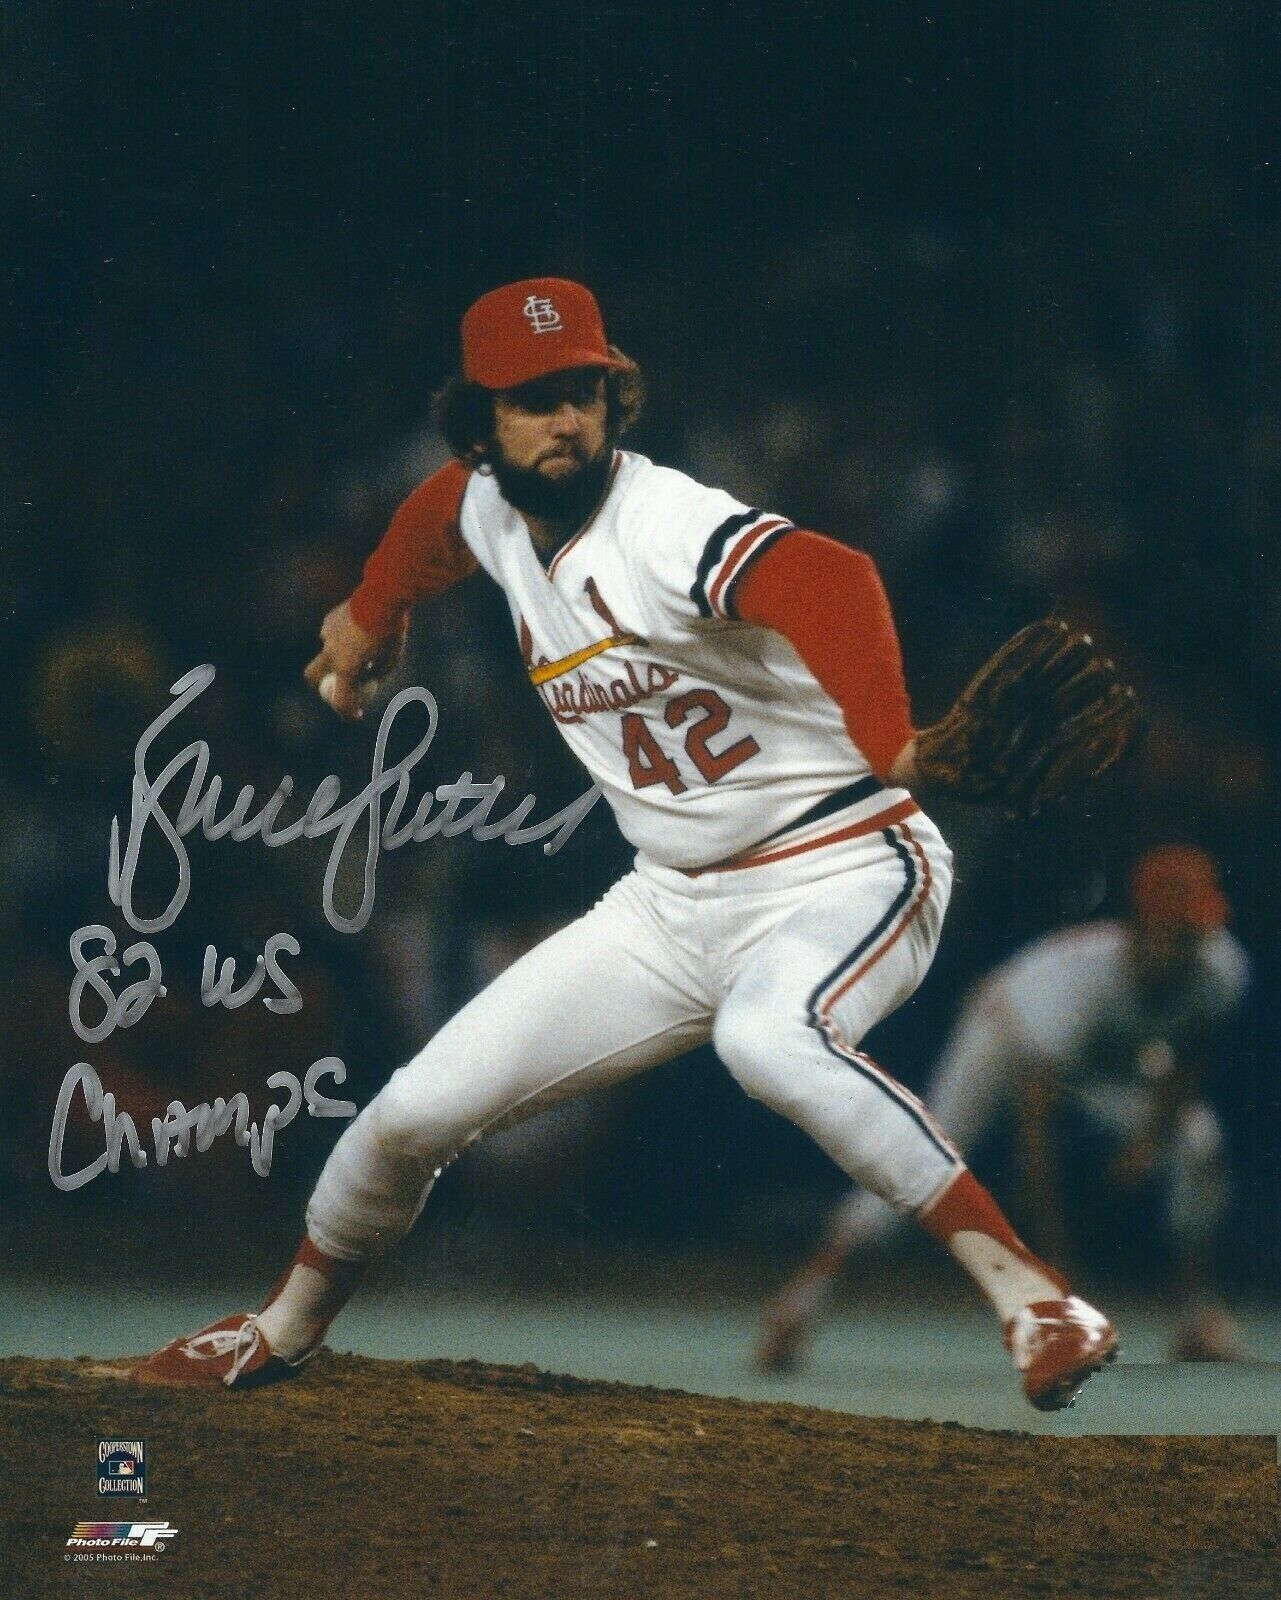 Bruce Sutter Autographed Signed 8x10 Photo Poster painting ( HOF Cardinals ) REPRINT